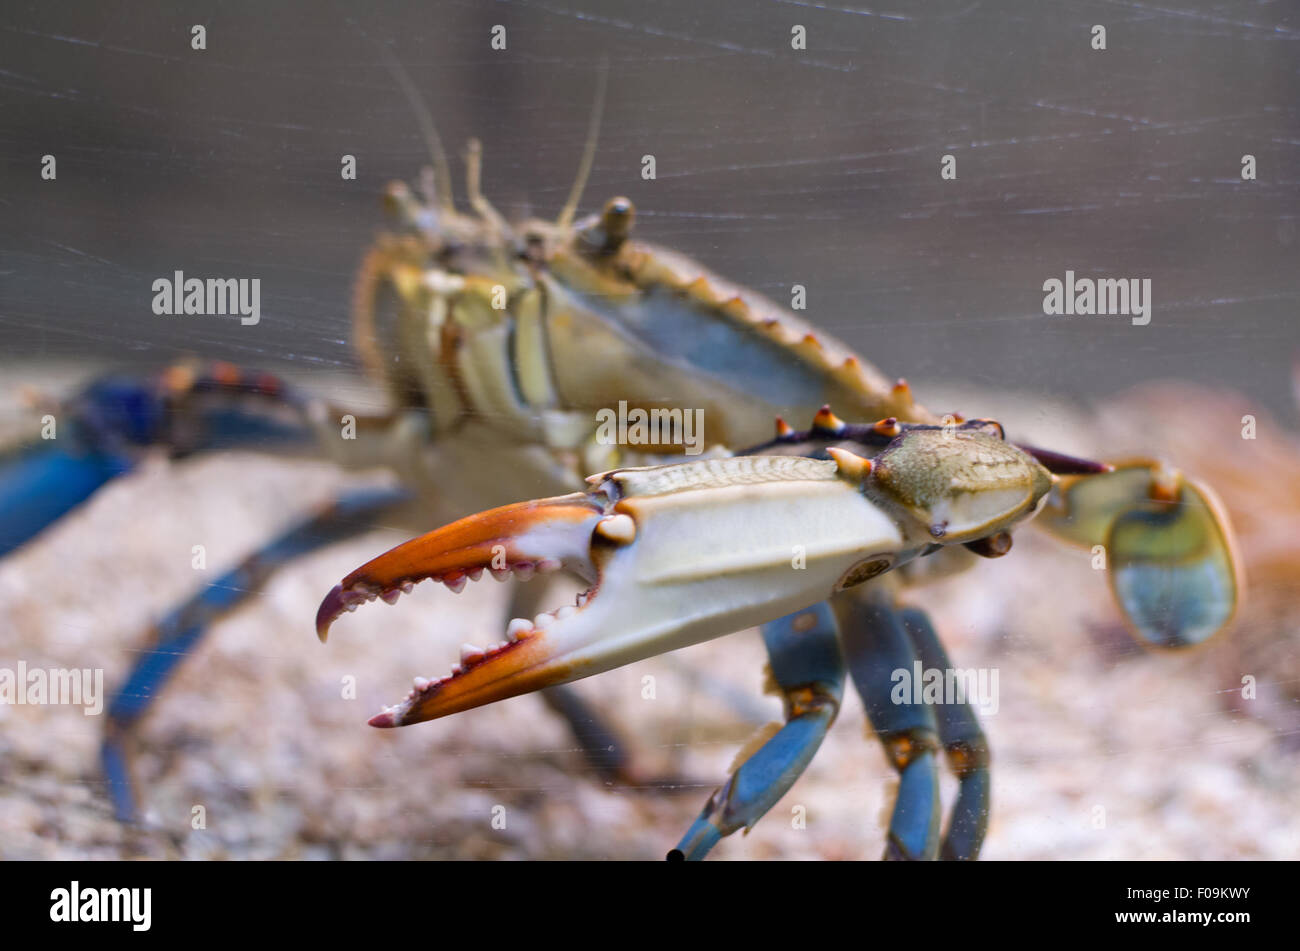 Atlantic Blue Crab with Orange Pincers Side Closeup and Scratched Aquarium Glass Stock Photo